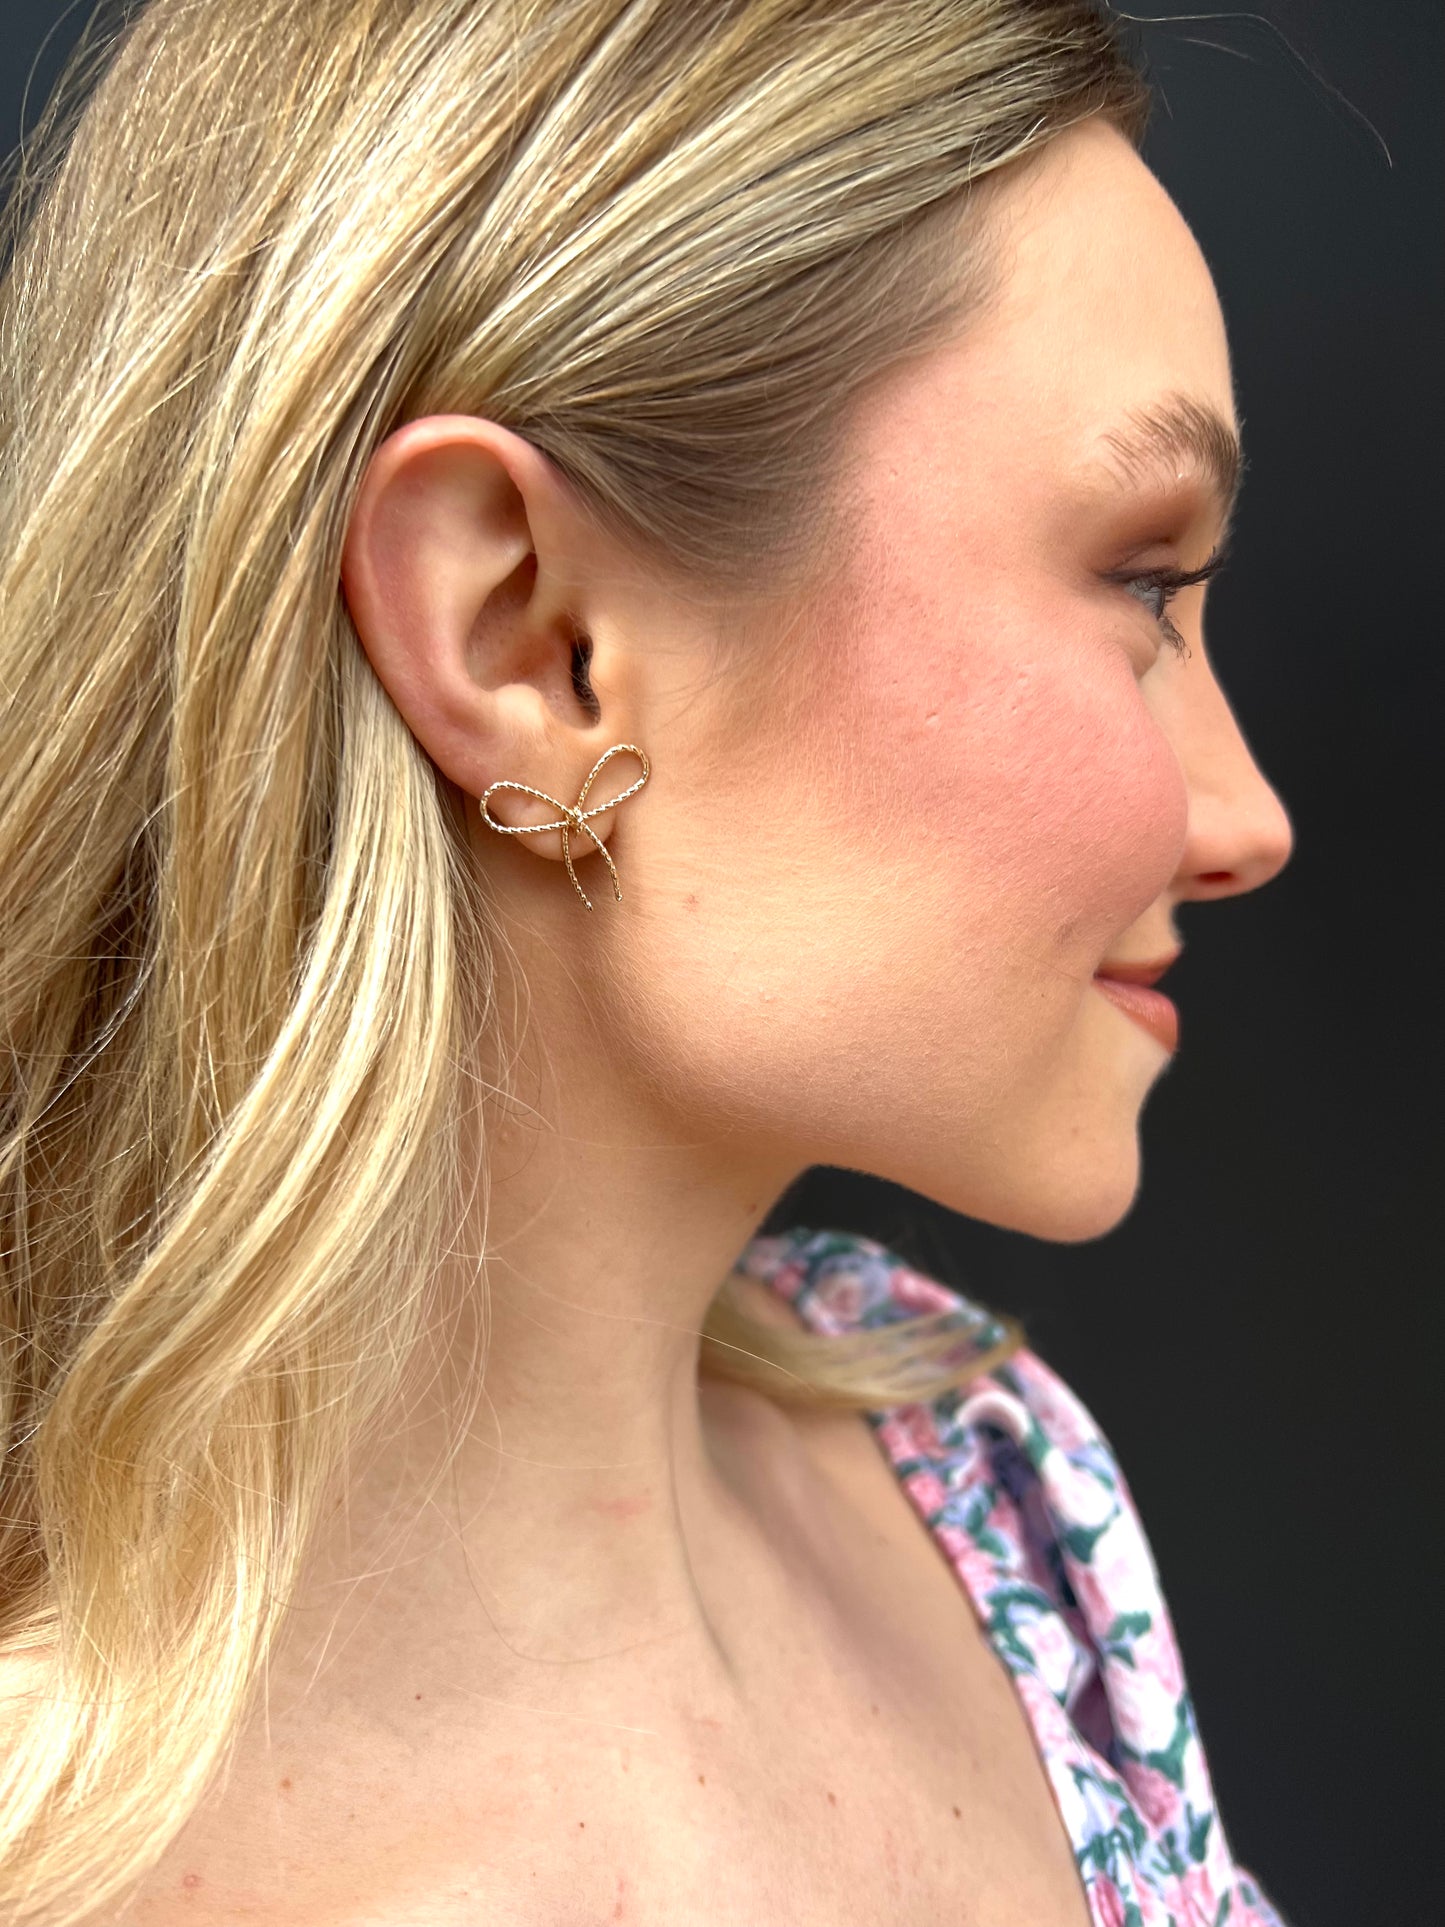 The Braided Bow Earring